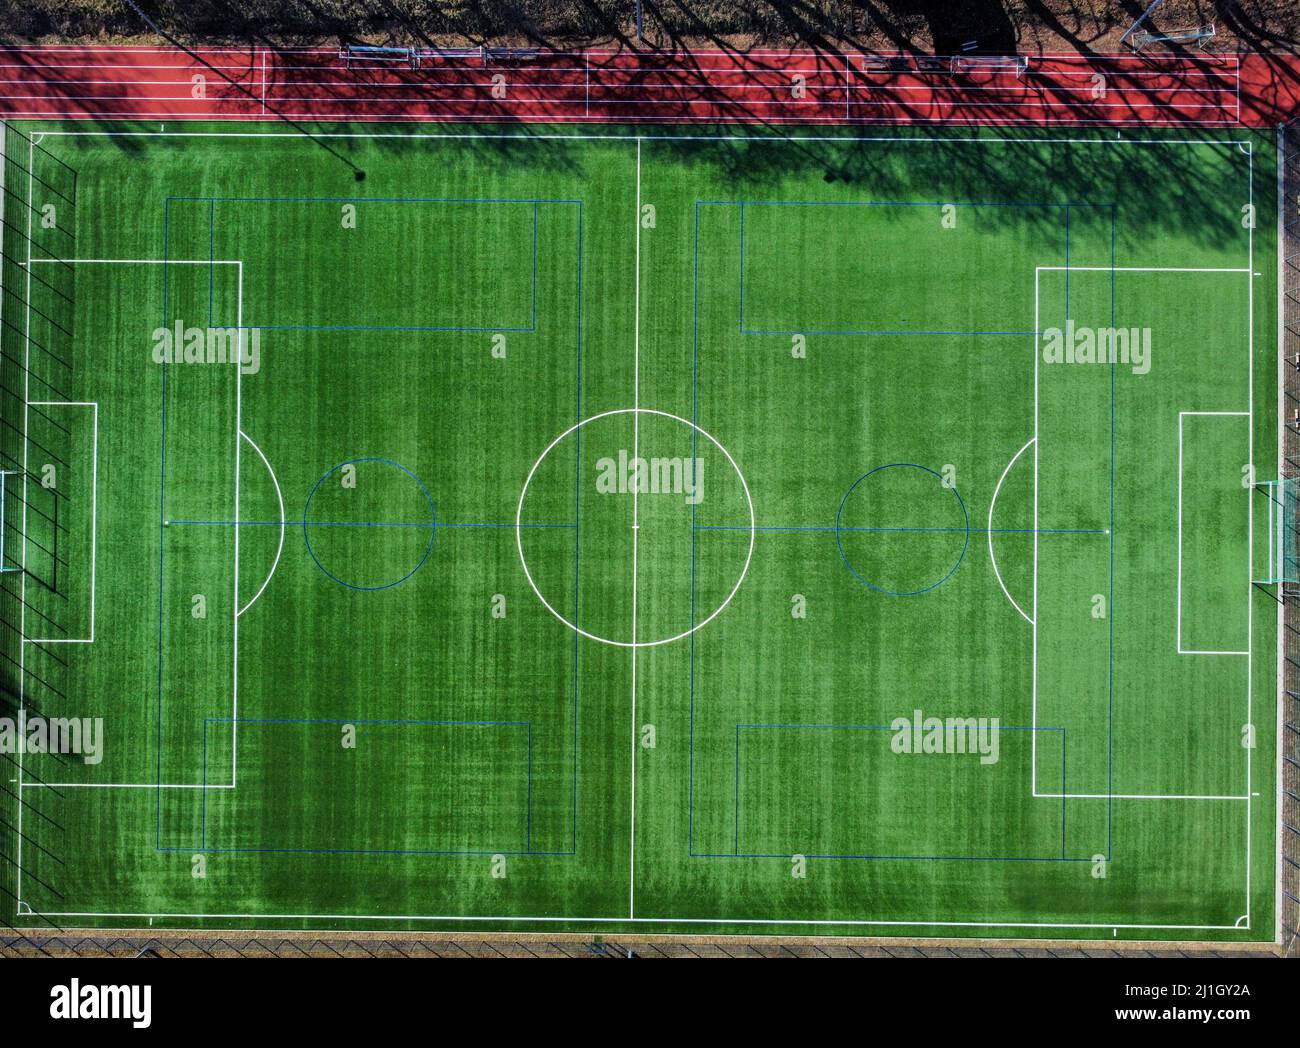 Aerial view of a soccer field Stock Photo